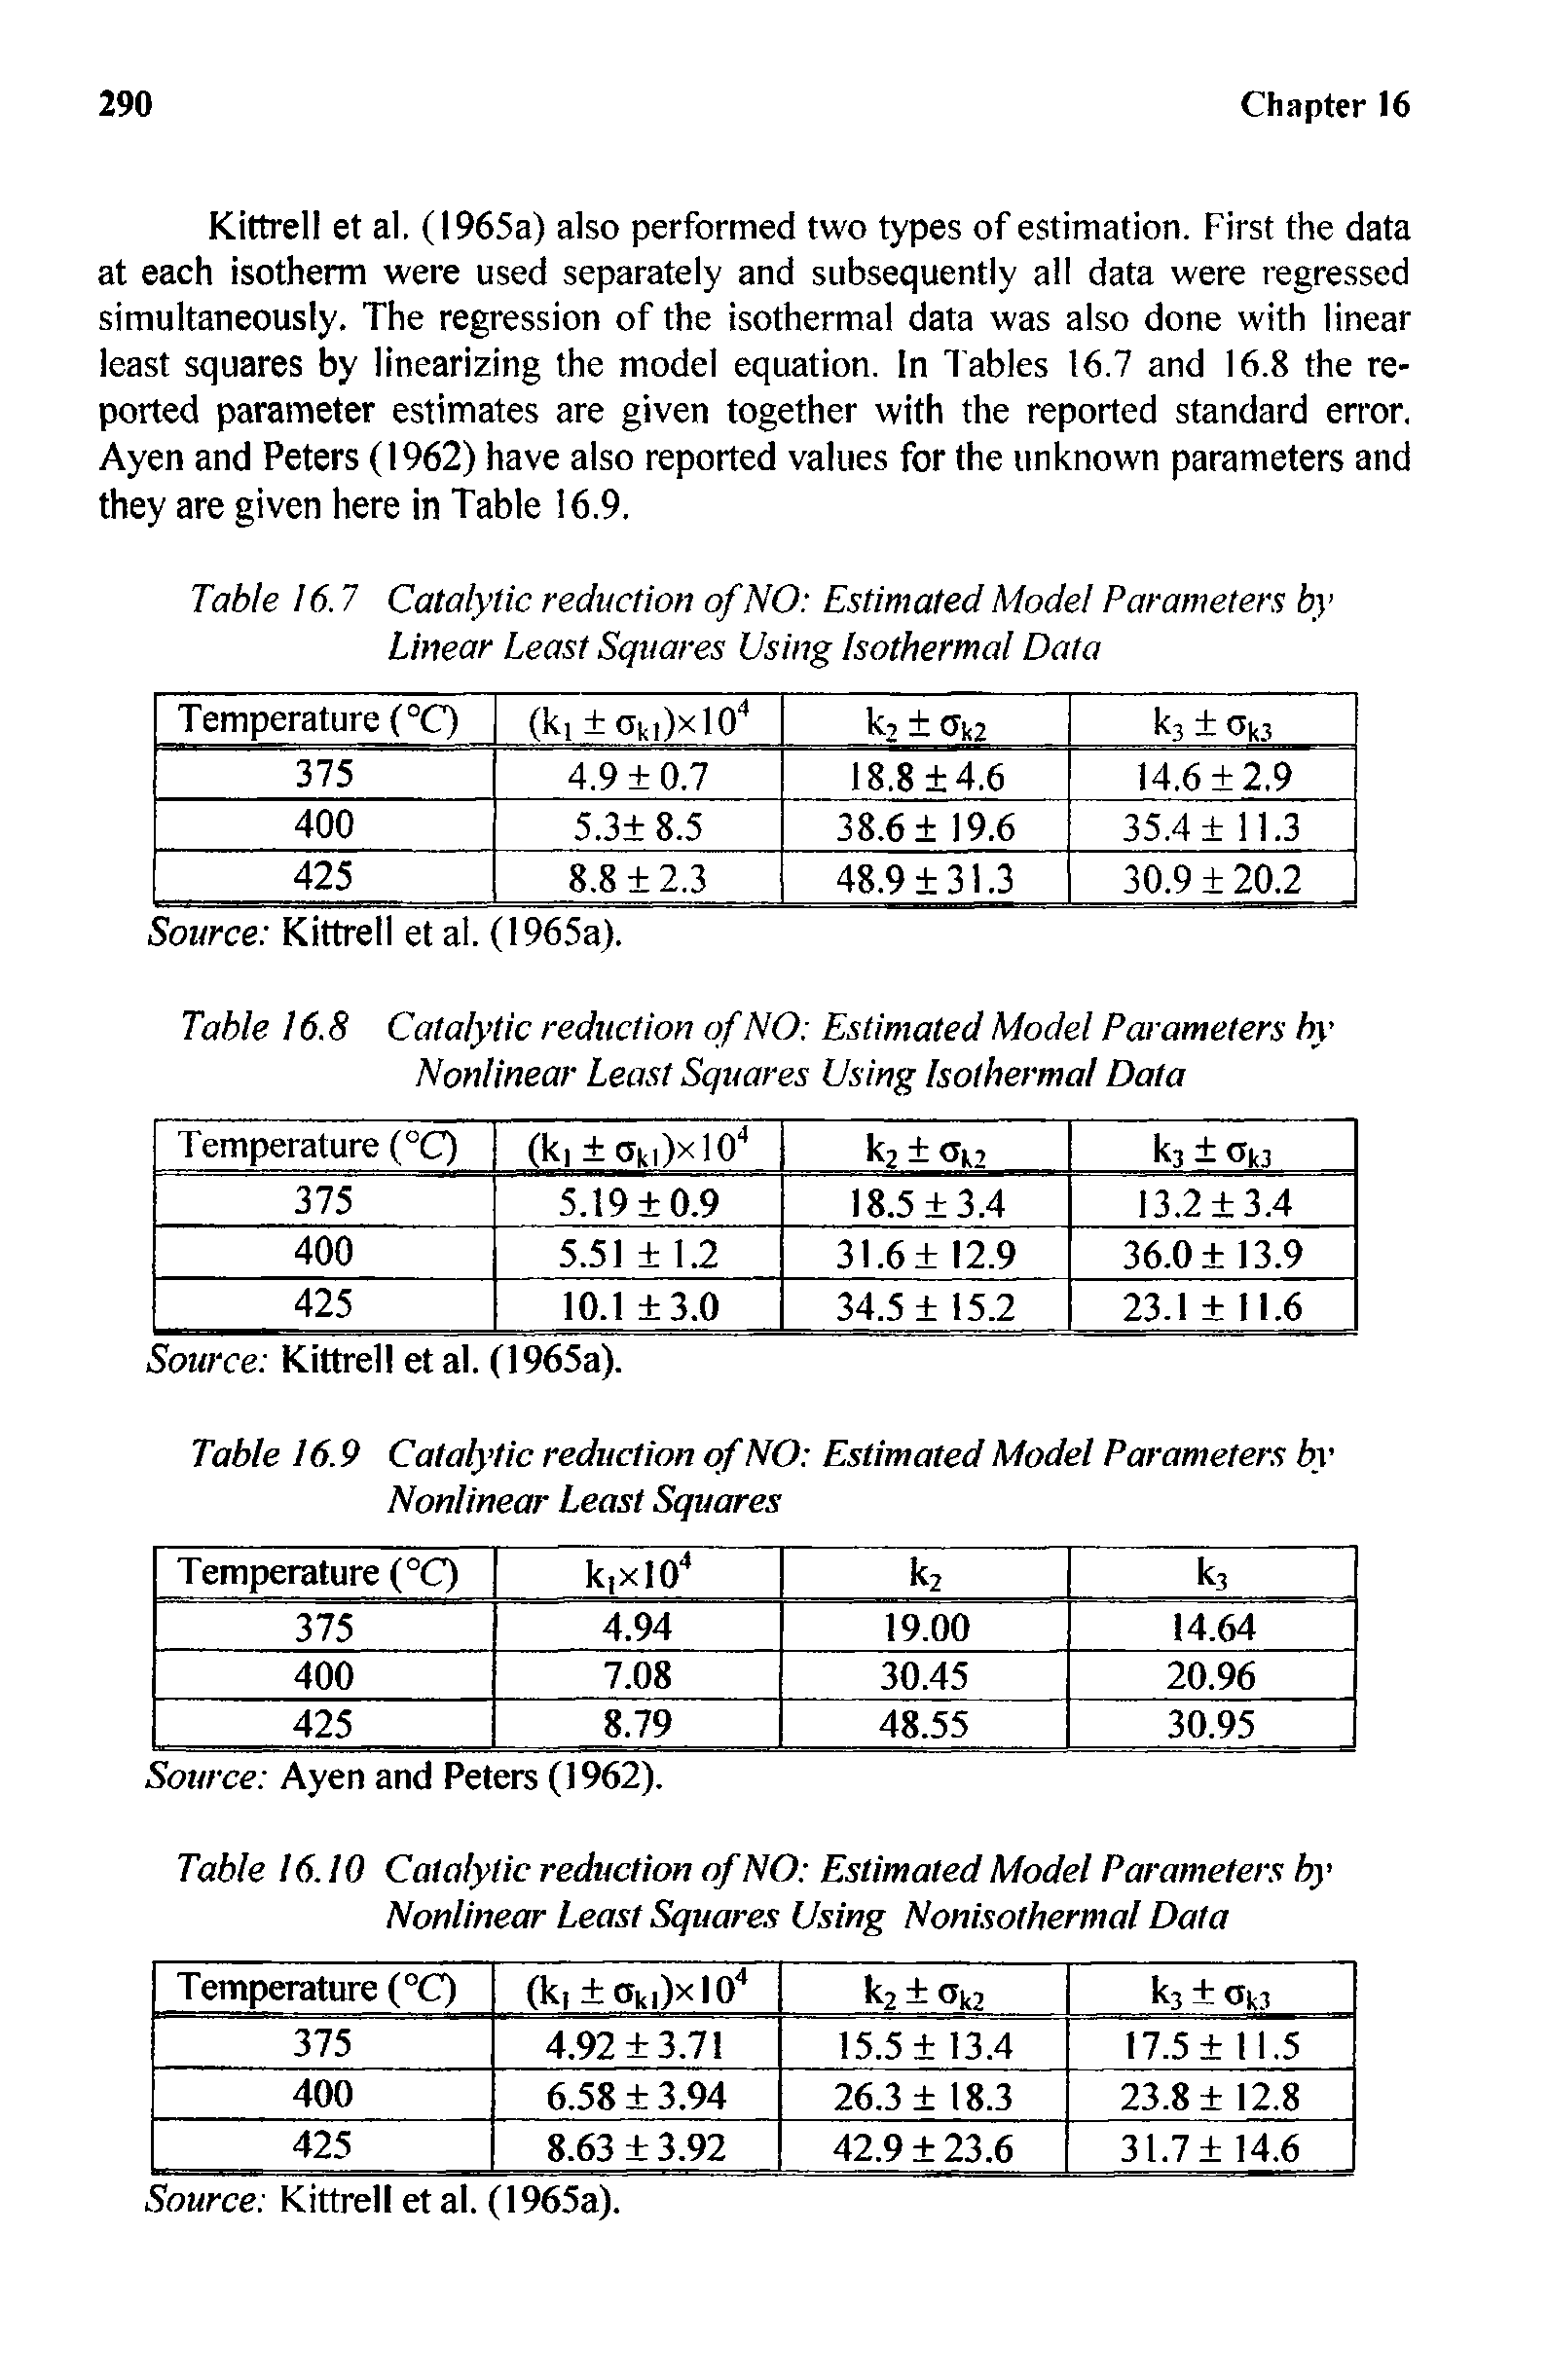 Table 16.10 Catalytic reduction of NO Estimated Model Parameters by Nonlinear Least Squares Using Nonisothermal Data...